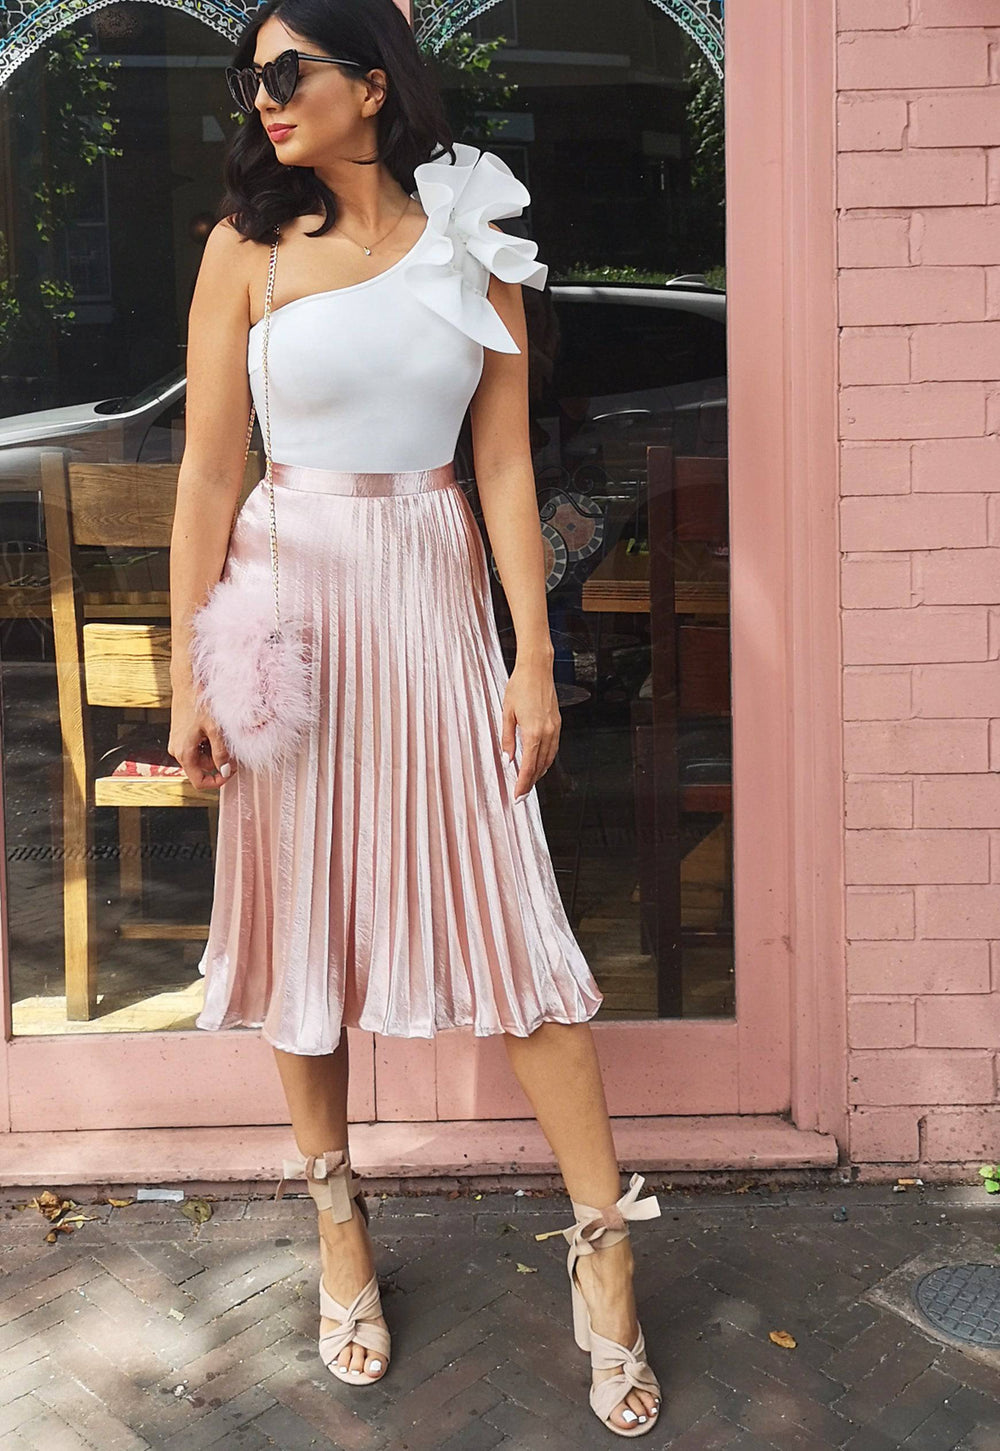 Metallic Satin Pleated High Waisted Midi Skirt in Rose Gold - One Nation Clothing